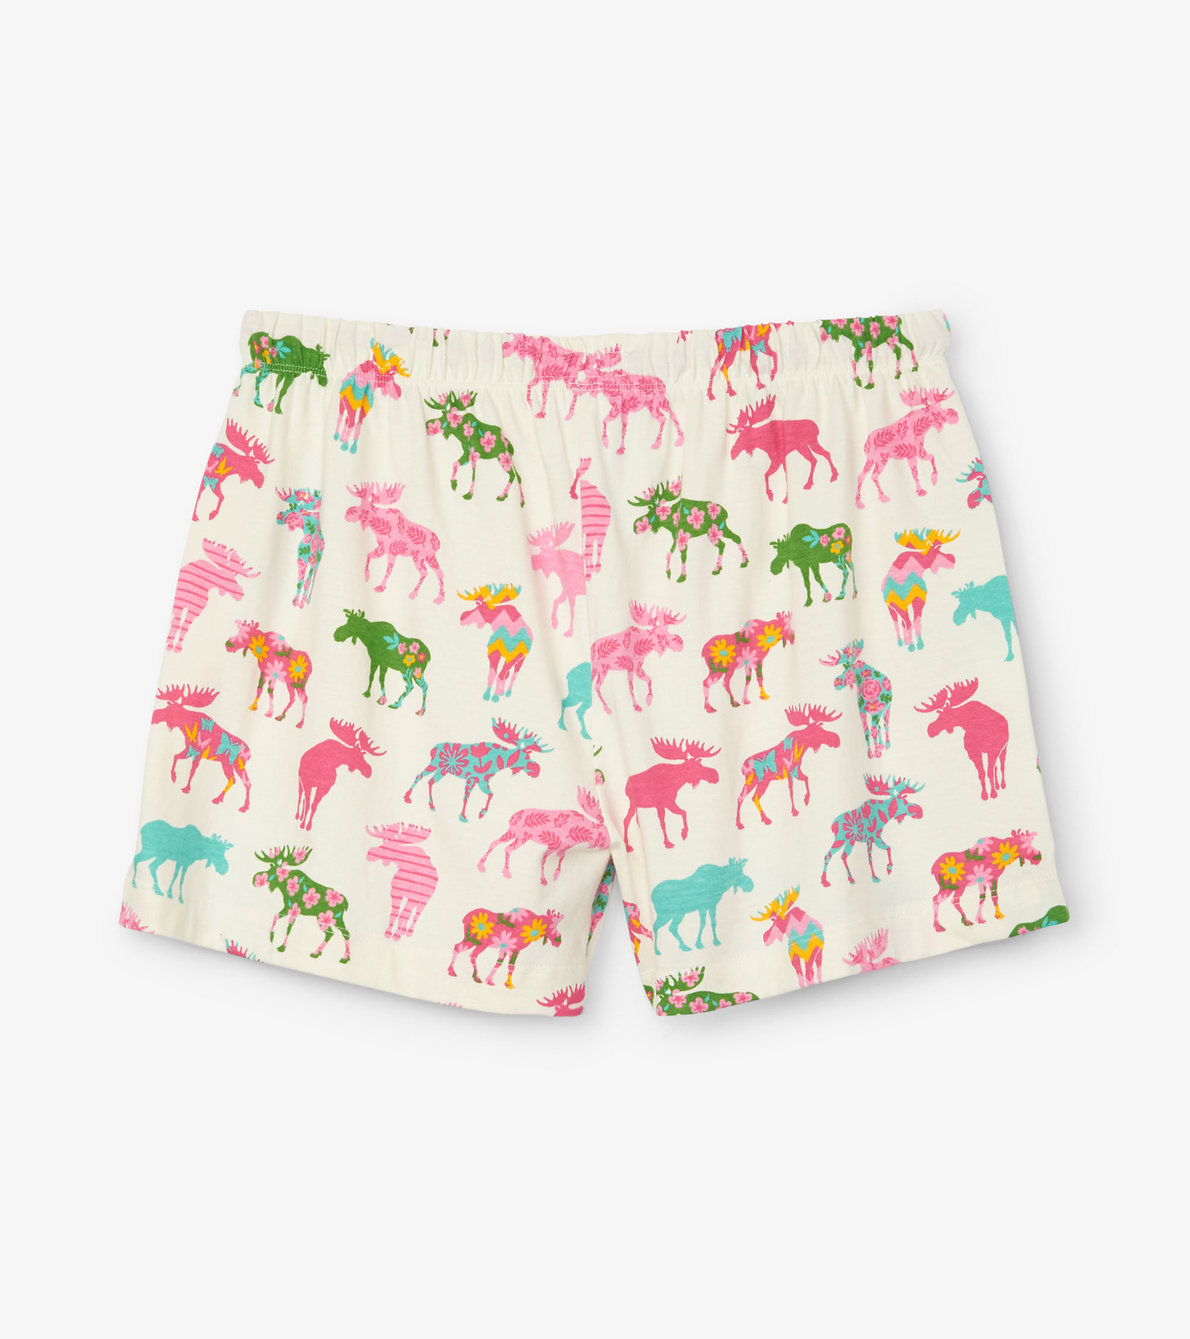 View larger image of Patterned Moose Women's Sleep Shorts